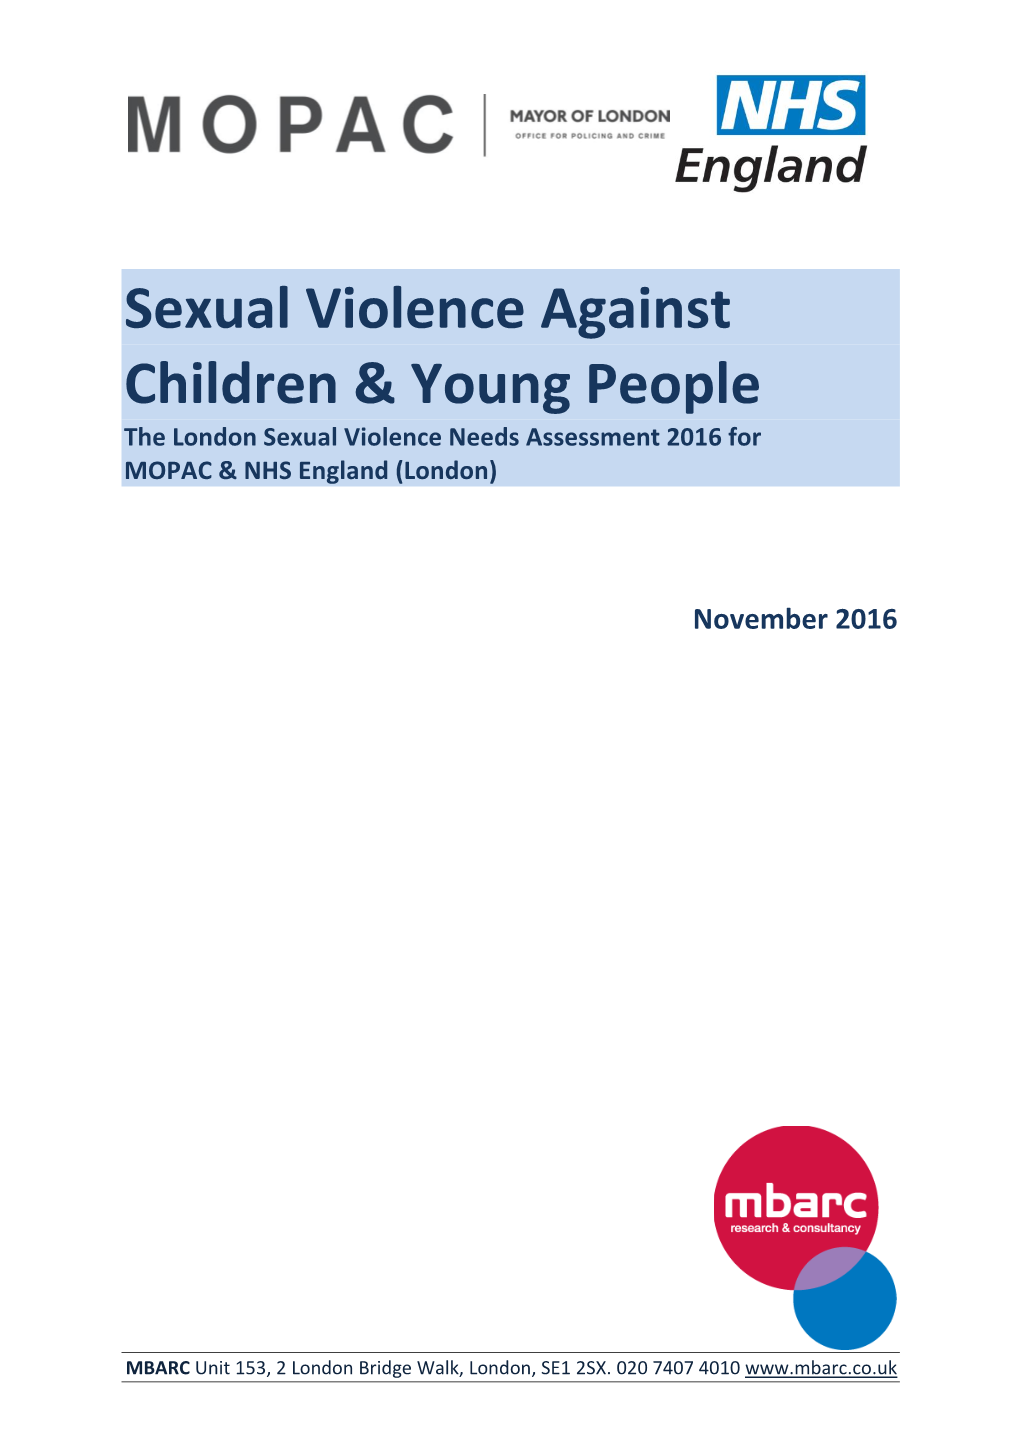 Sexual Violence Against Children & Young People Needs Assessment